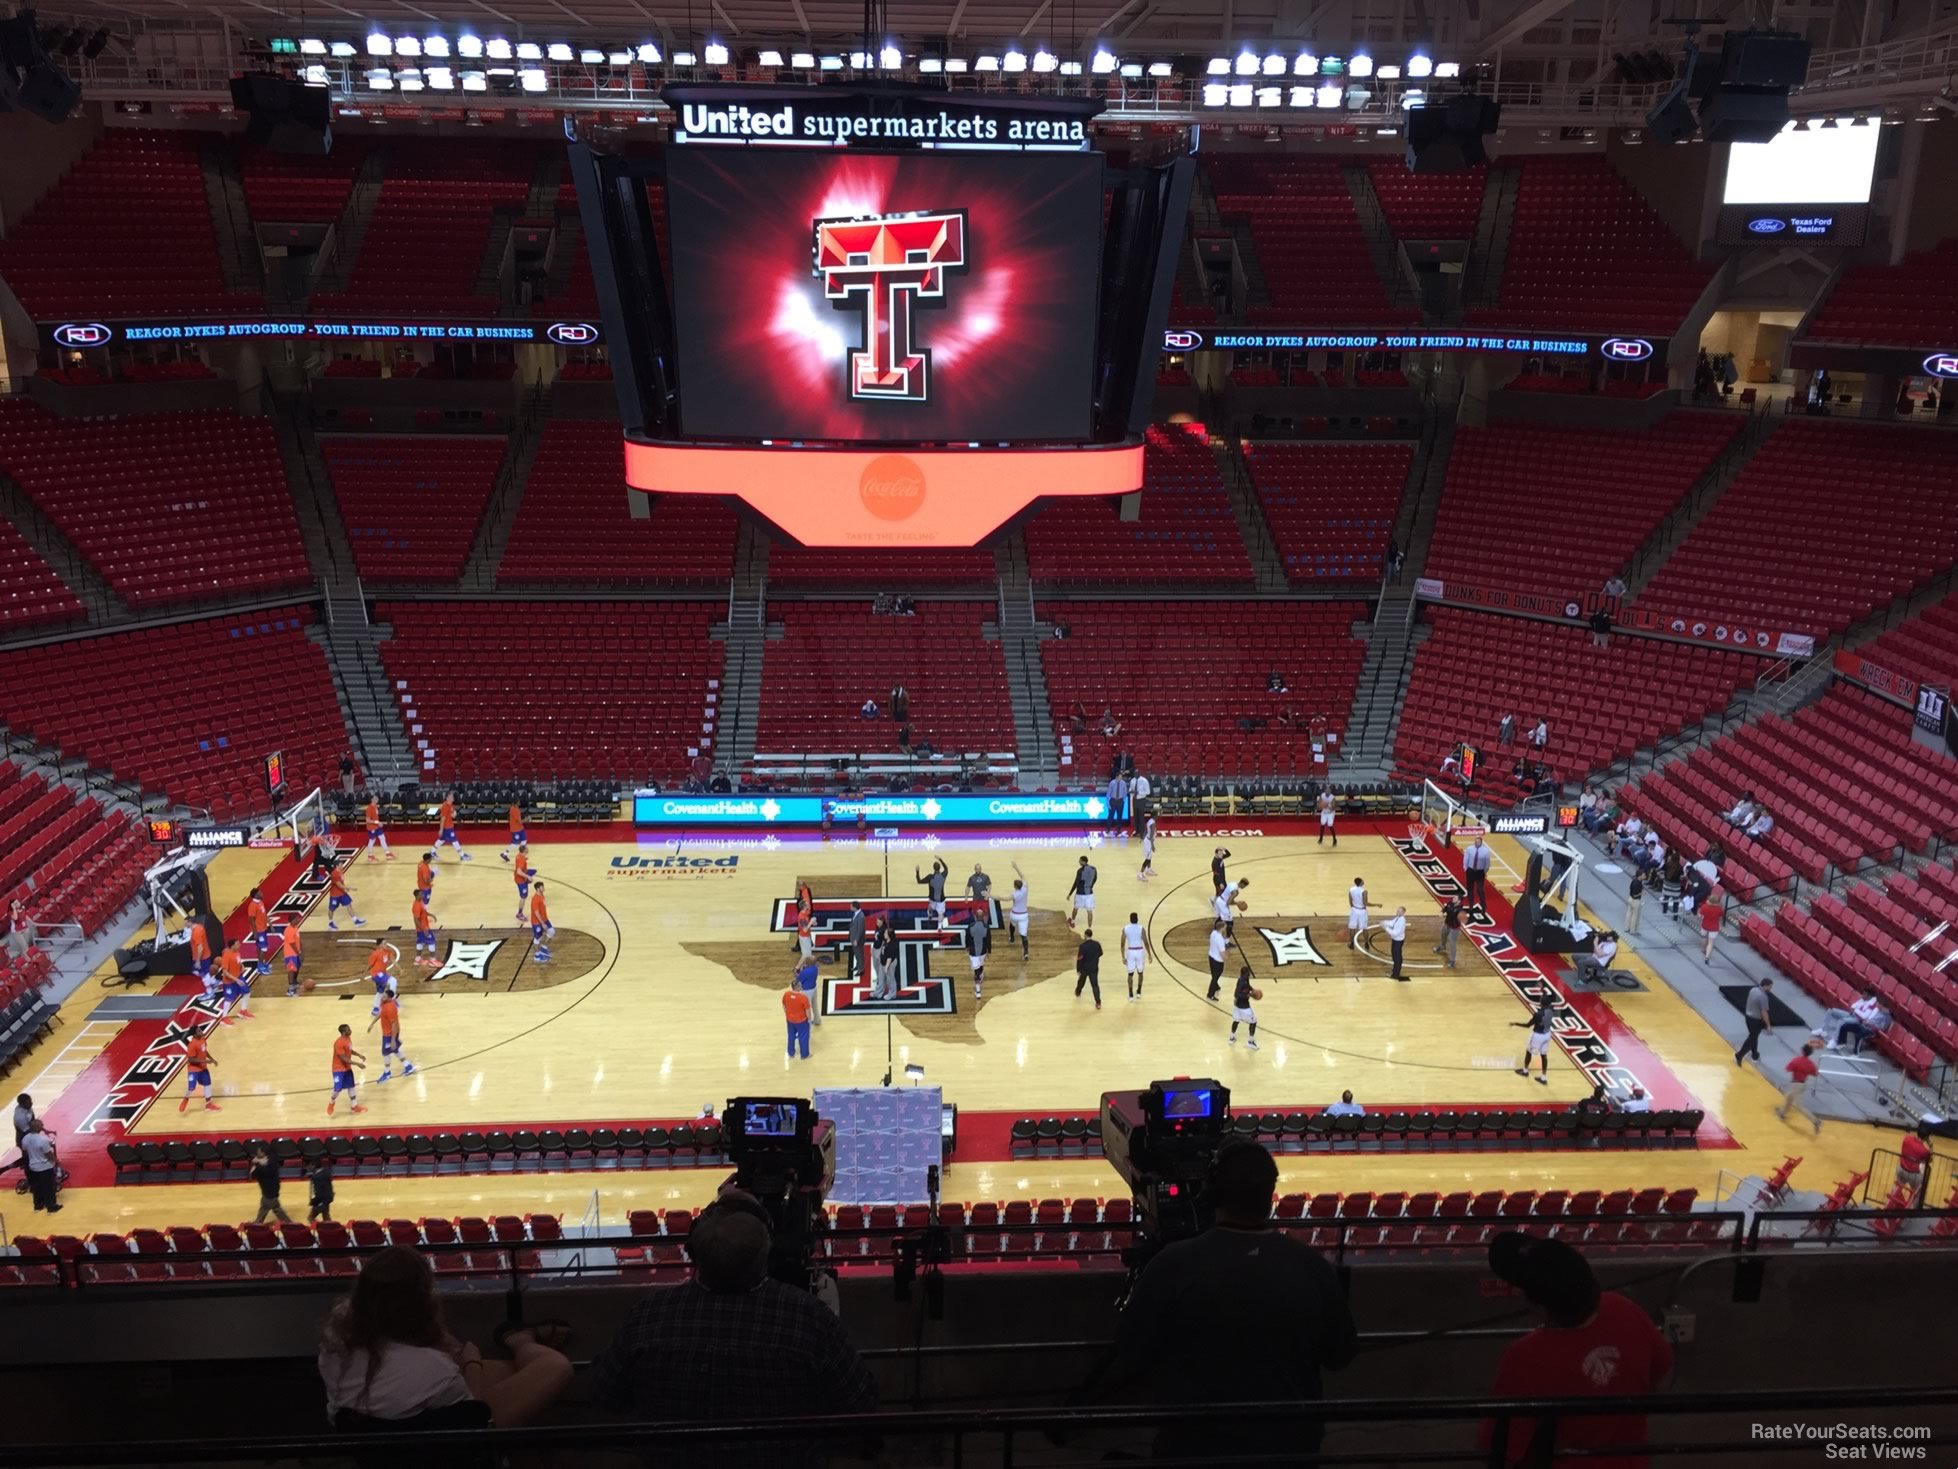 section 201, row 7 seat view  - united supermarkets arena